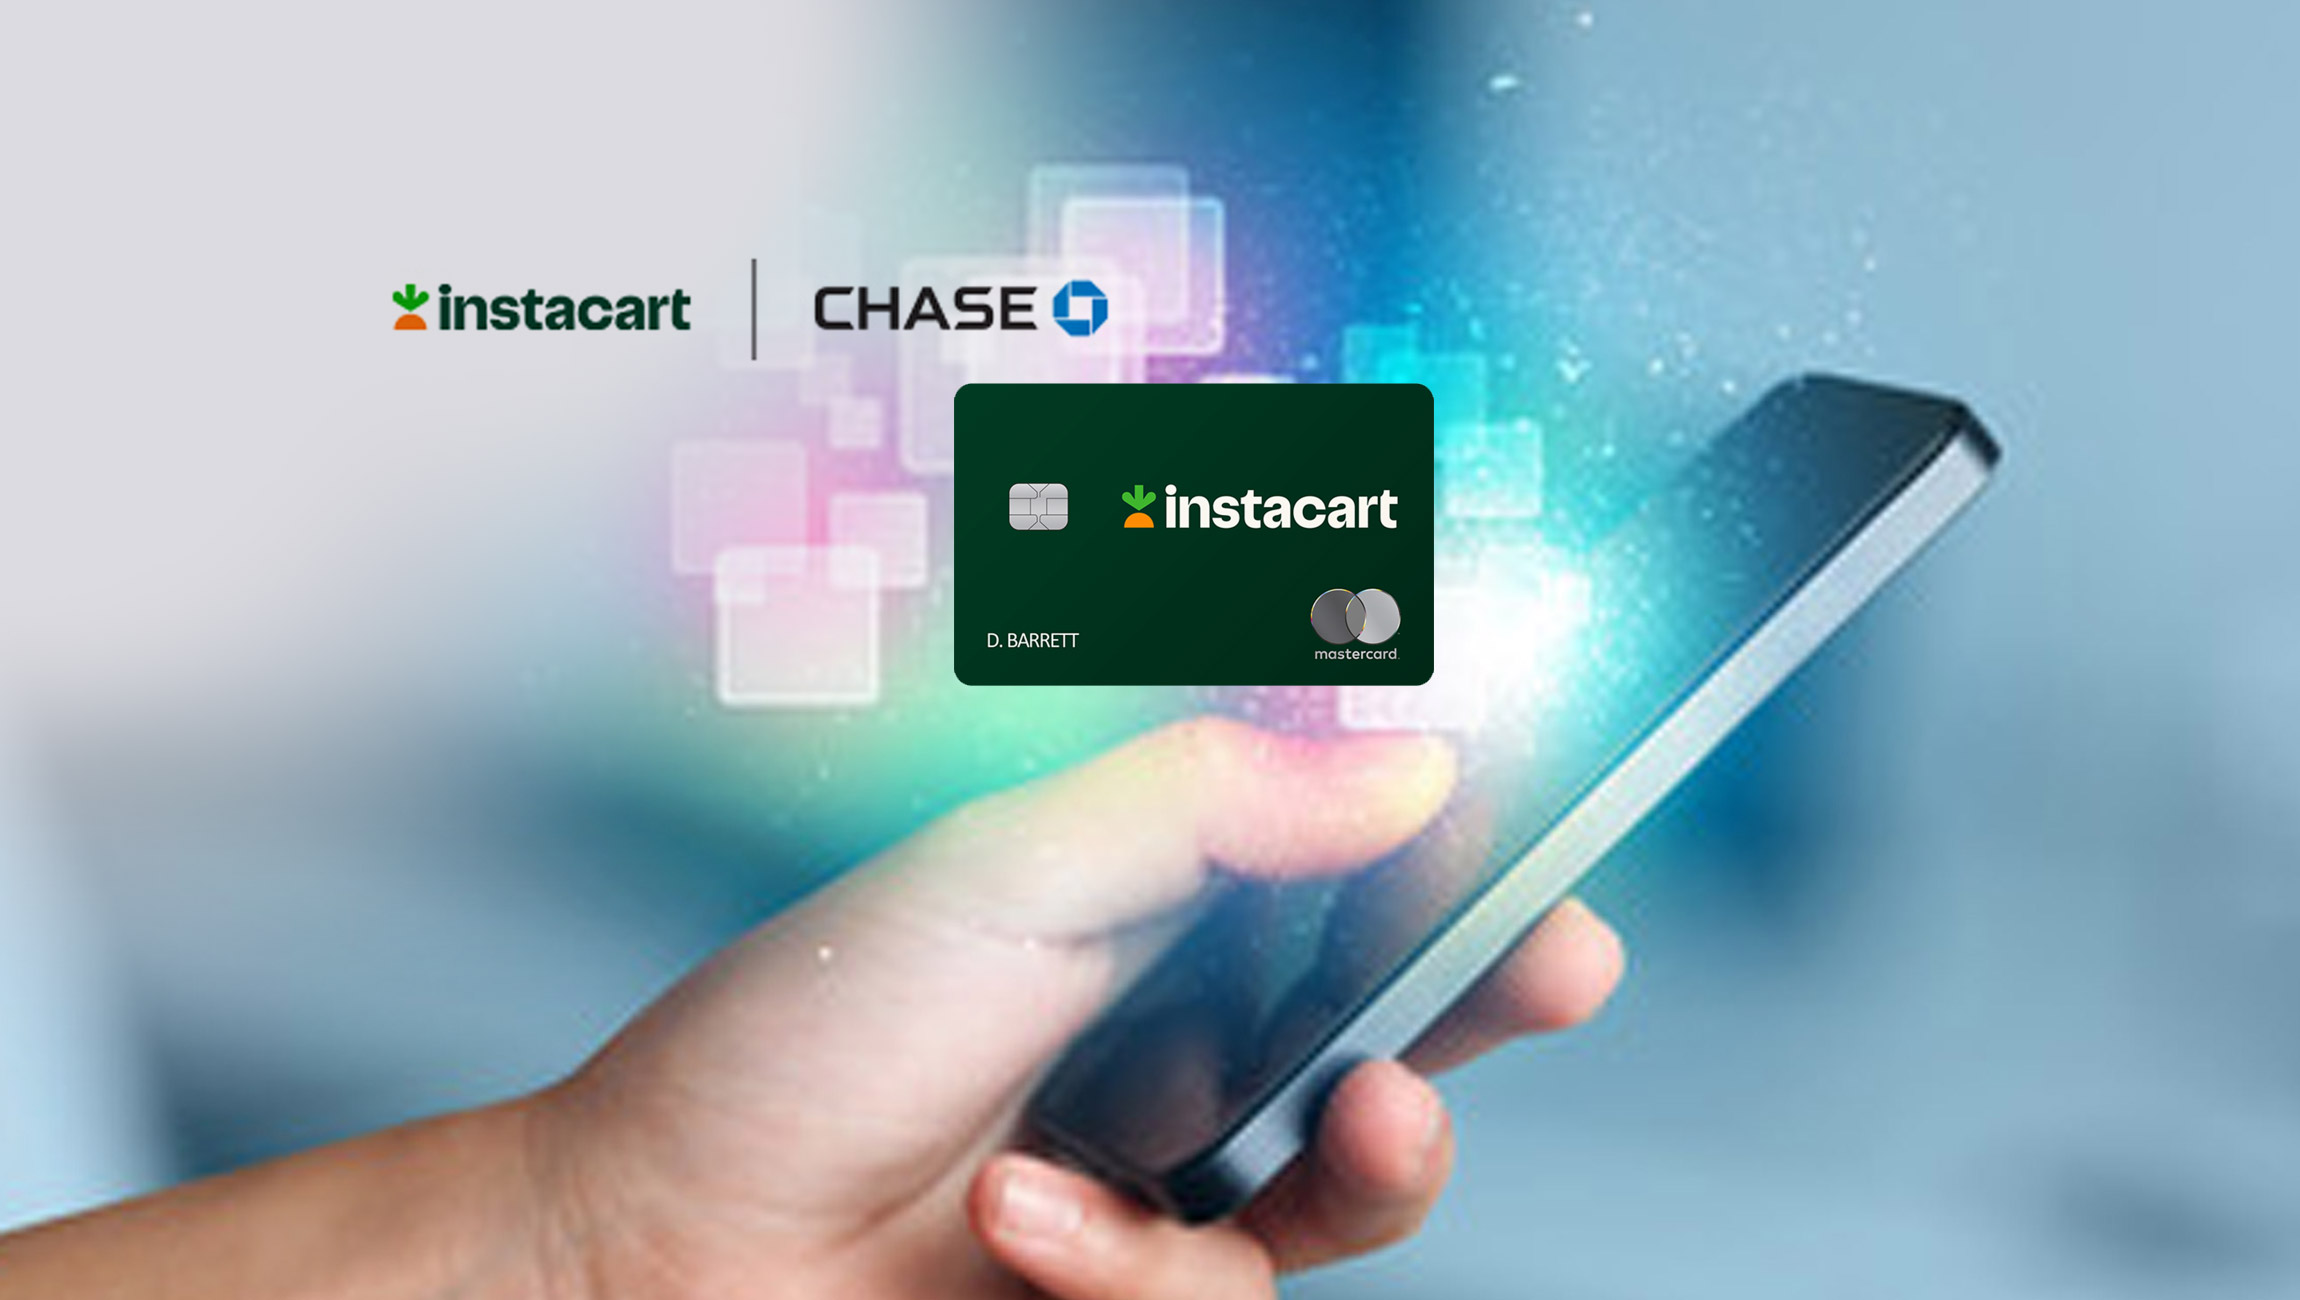 Instacart and Chase Launch New Instacart Mastercard Credit Card Unlocking New Rewards